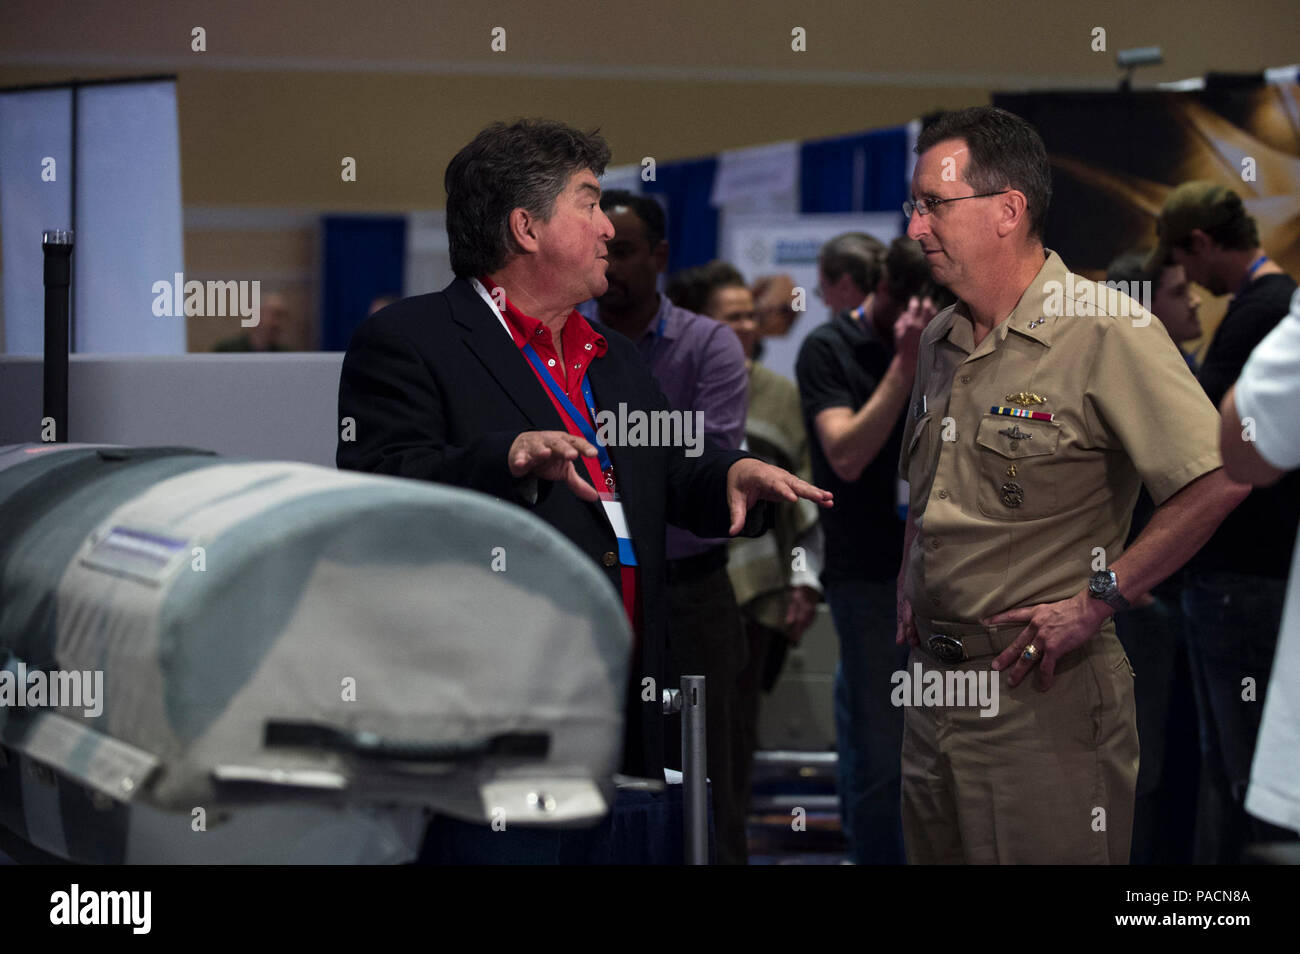 NATIONAL HARBOR, Md. (Apr. 2, 2017) Rear Adm. David Hahn, chief of naval research, talks to Anthony Mulligan, founder and CEO, Hydronalix, Inc., about the Emergency Integrated Lifesaving Lanyard (EMILY), a robotic device used by lifeguards for rescuing swimmers, prior to the opening of the Department of the Navy Forum for Small Business Innovation Research/Small Business Technology Transfer (SBIR/STTR) Transition. The forum is a long-standing venue for connecting SBIR/STTR-funded technologies with warfighters, government acquisition and technical personnel, large primes, system integrators, an Stock Photo